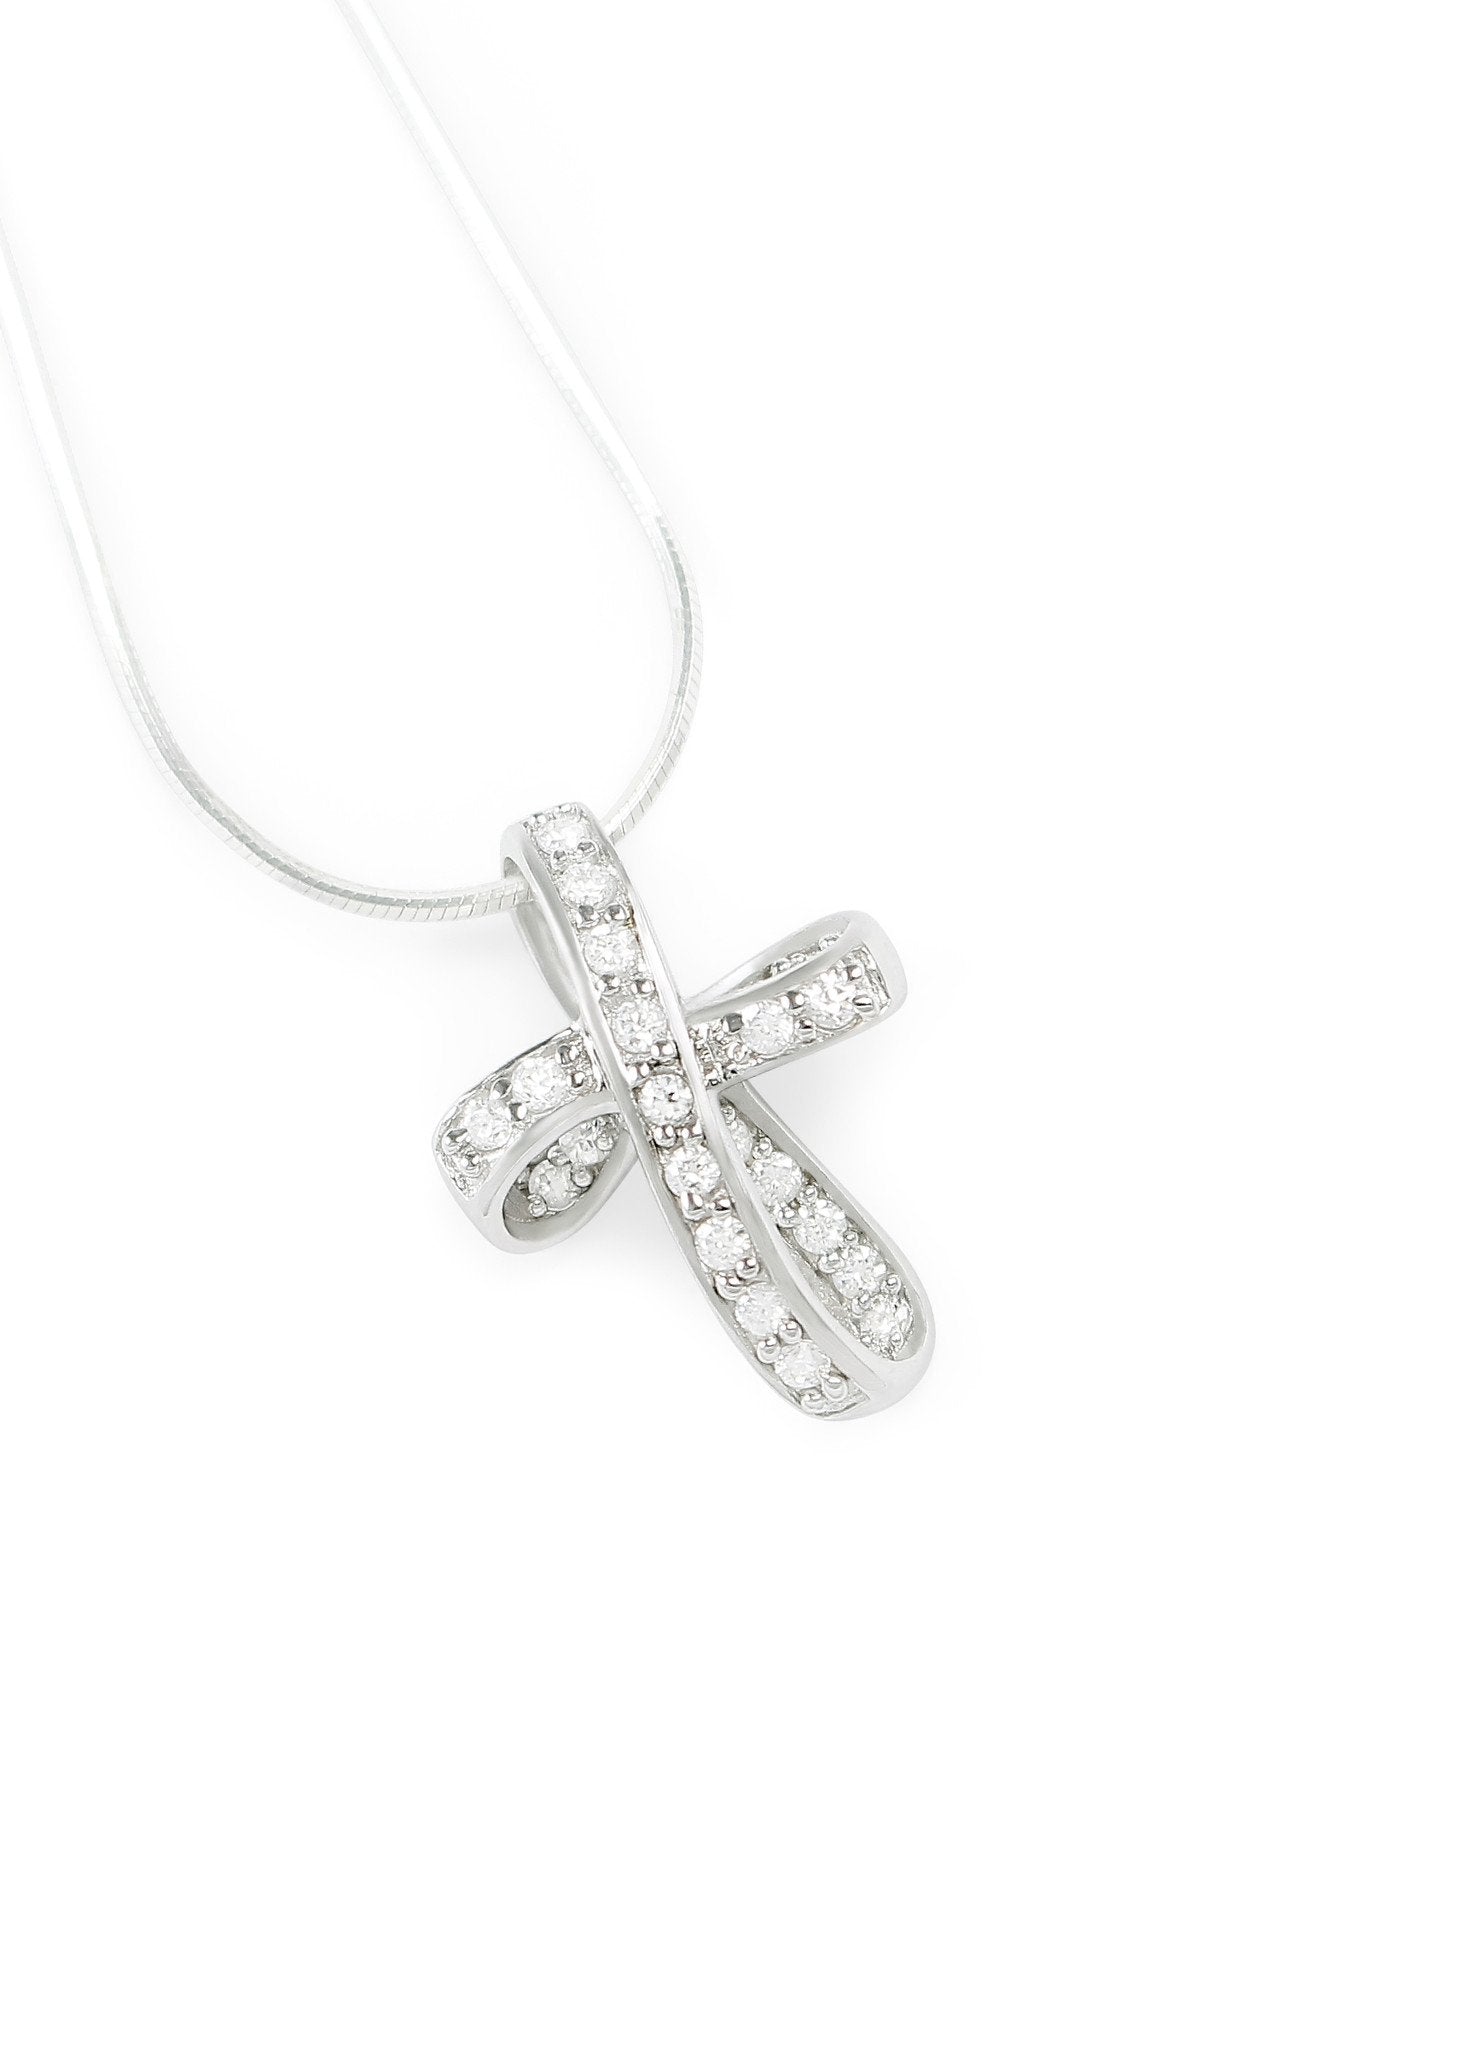 Top 12 Most Popular Silver Cross Necklaces | Classy Women Collection